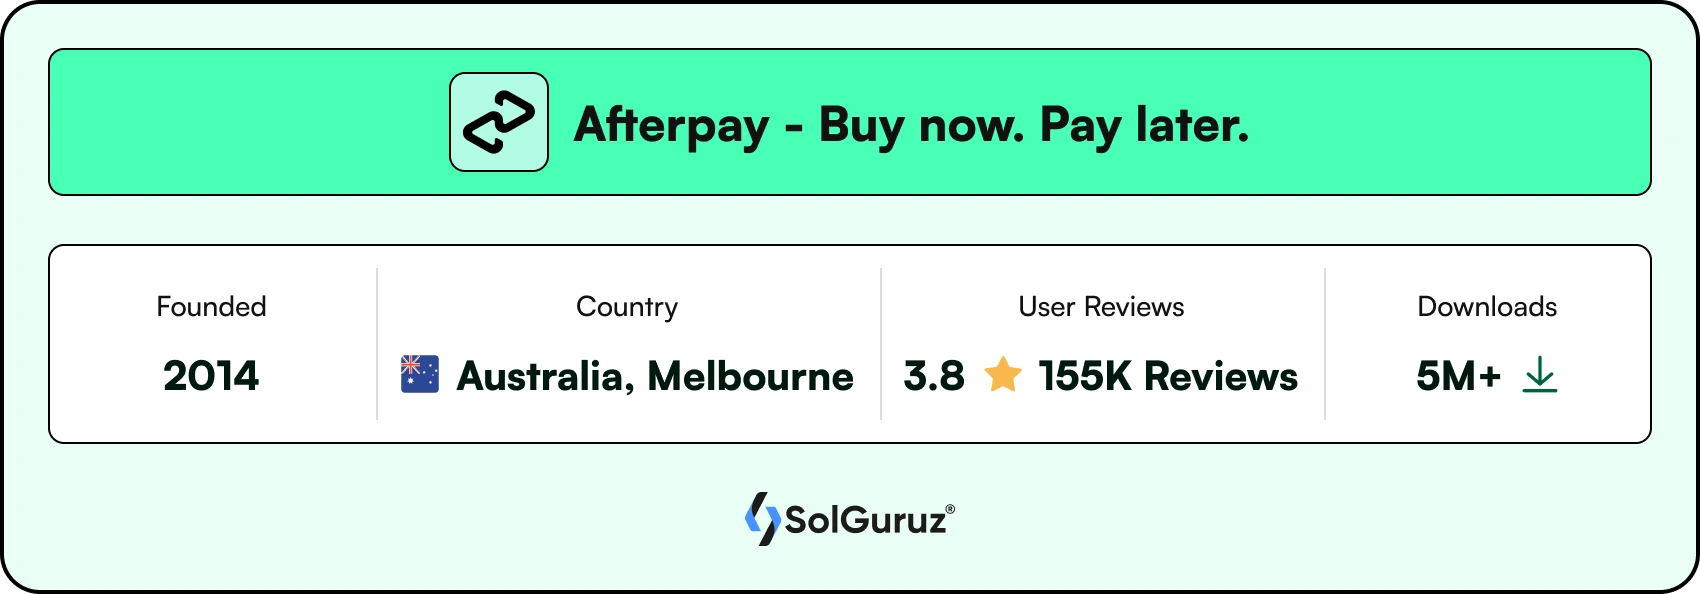 Afterpay - Buy now Pay later App